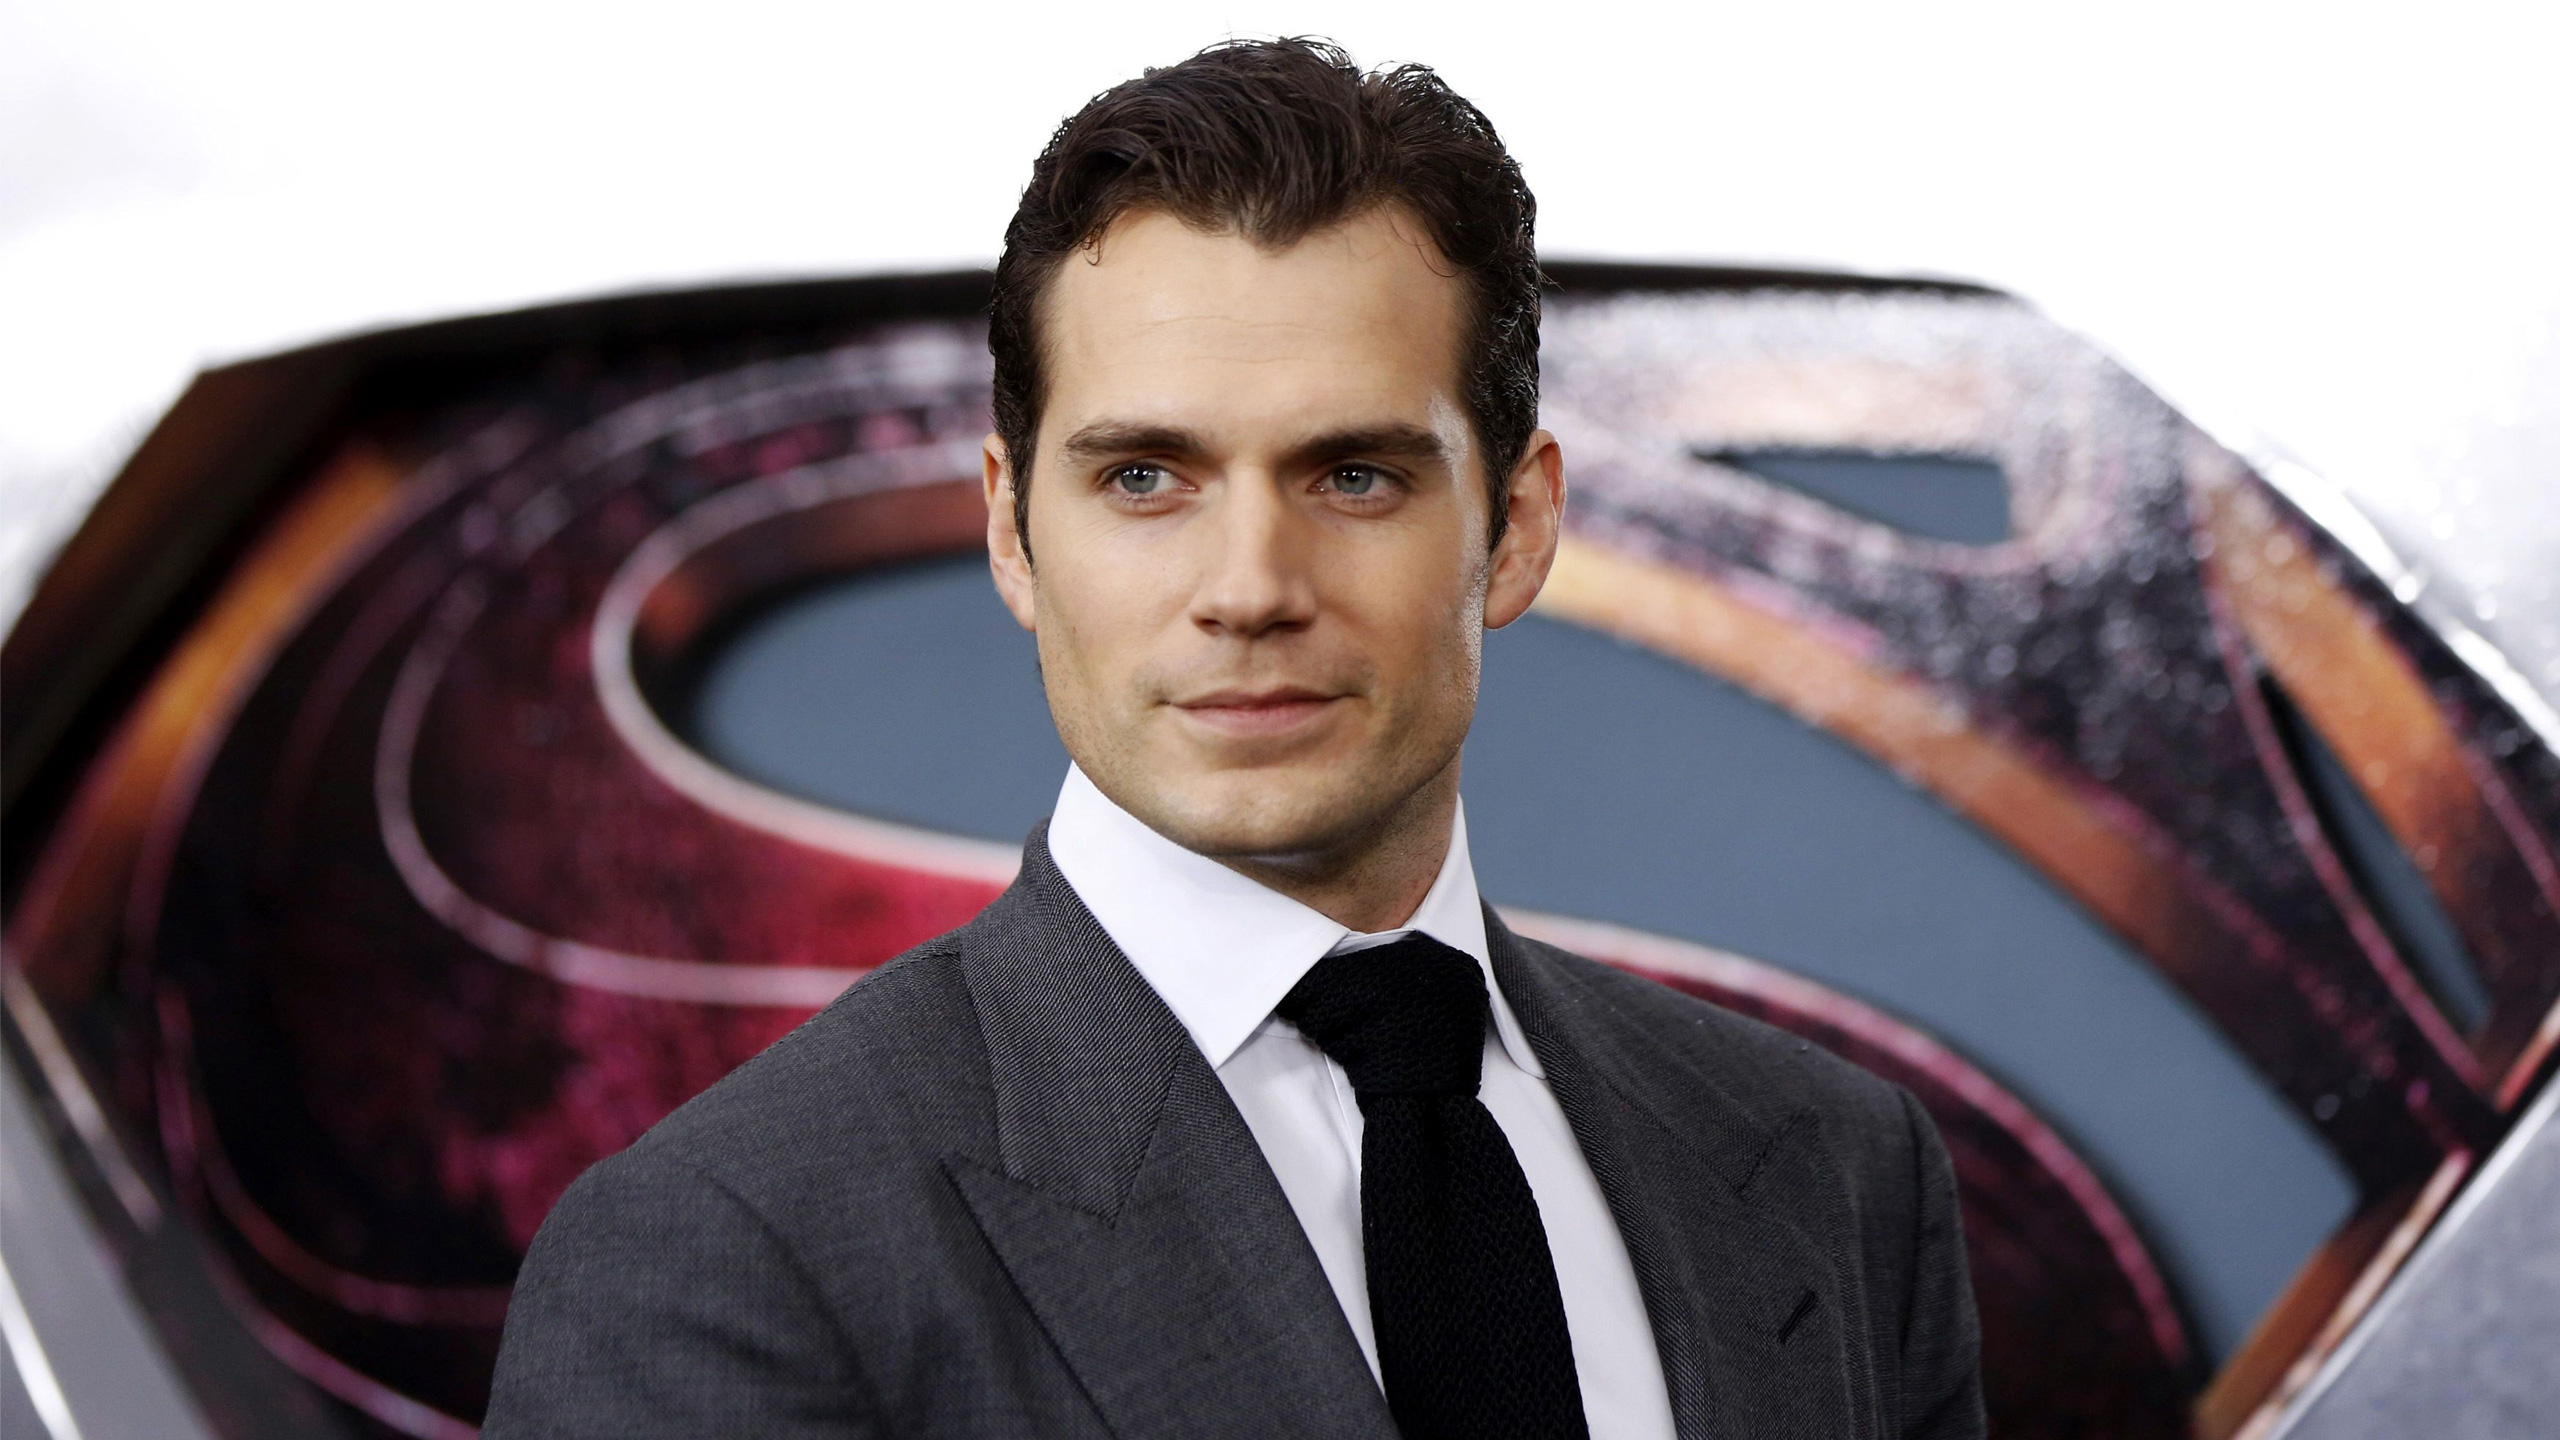 Henry Cavill to Star in and Executive Produce 'Warhammer 40,000